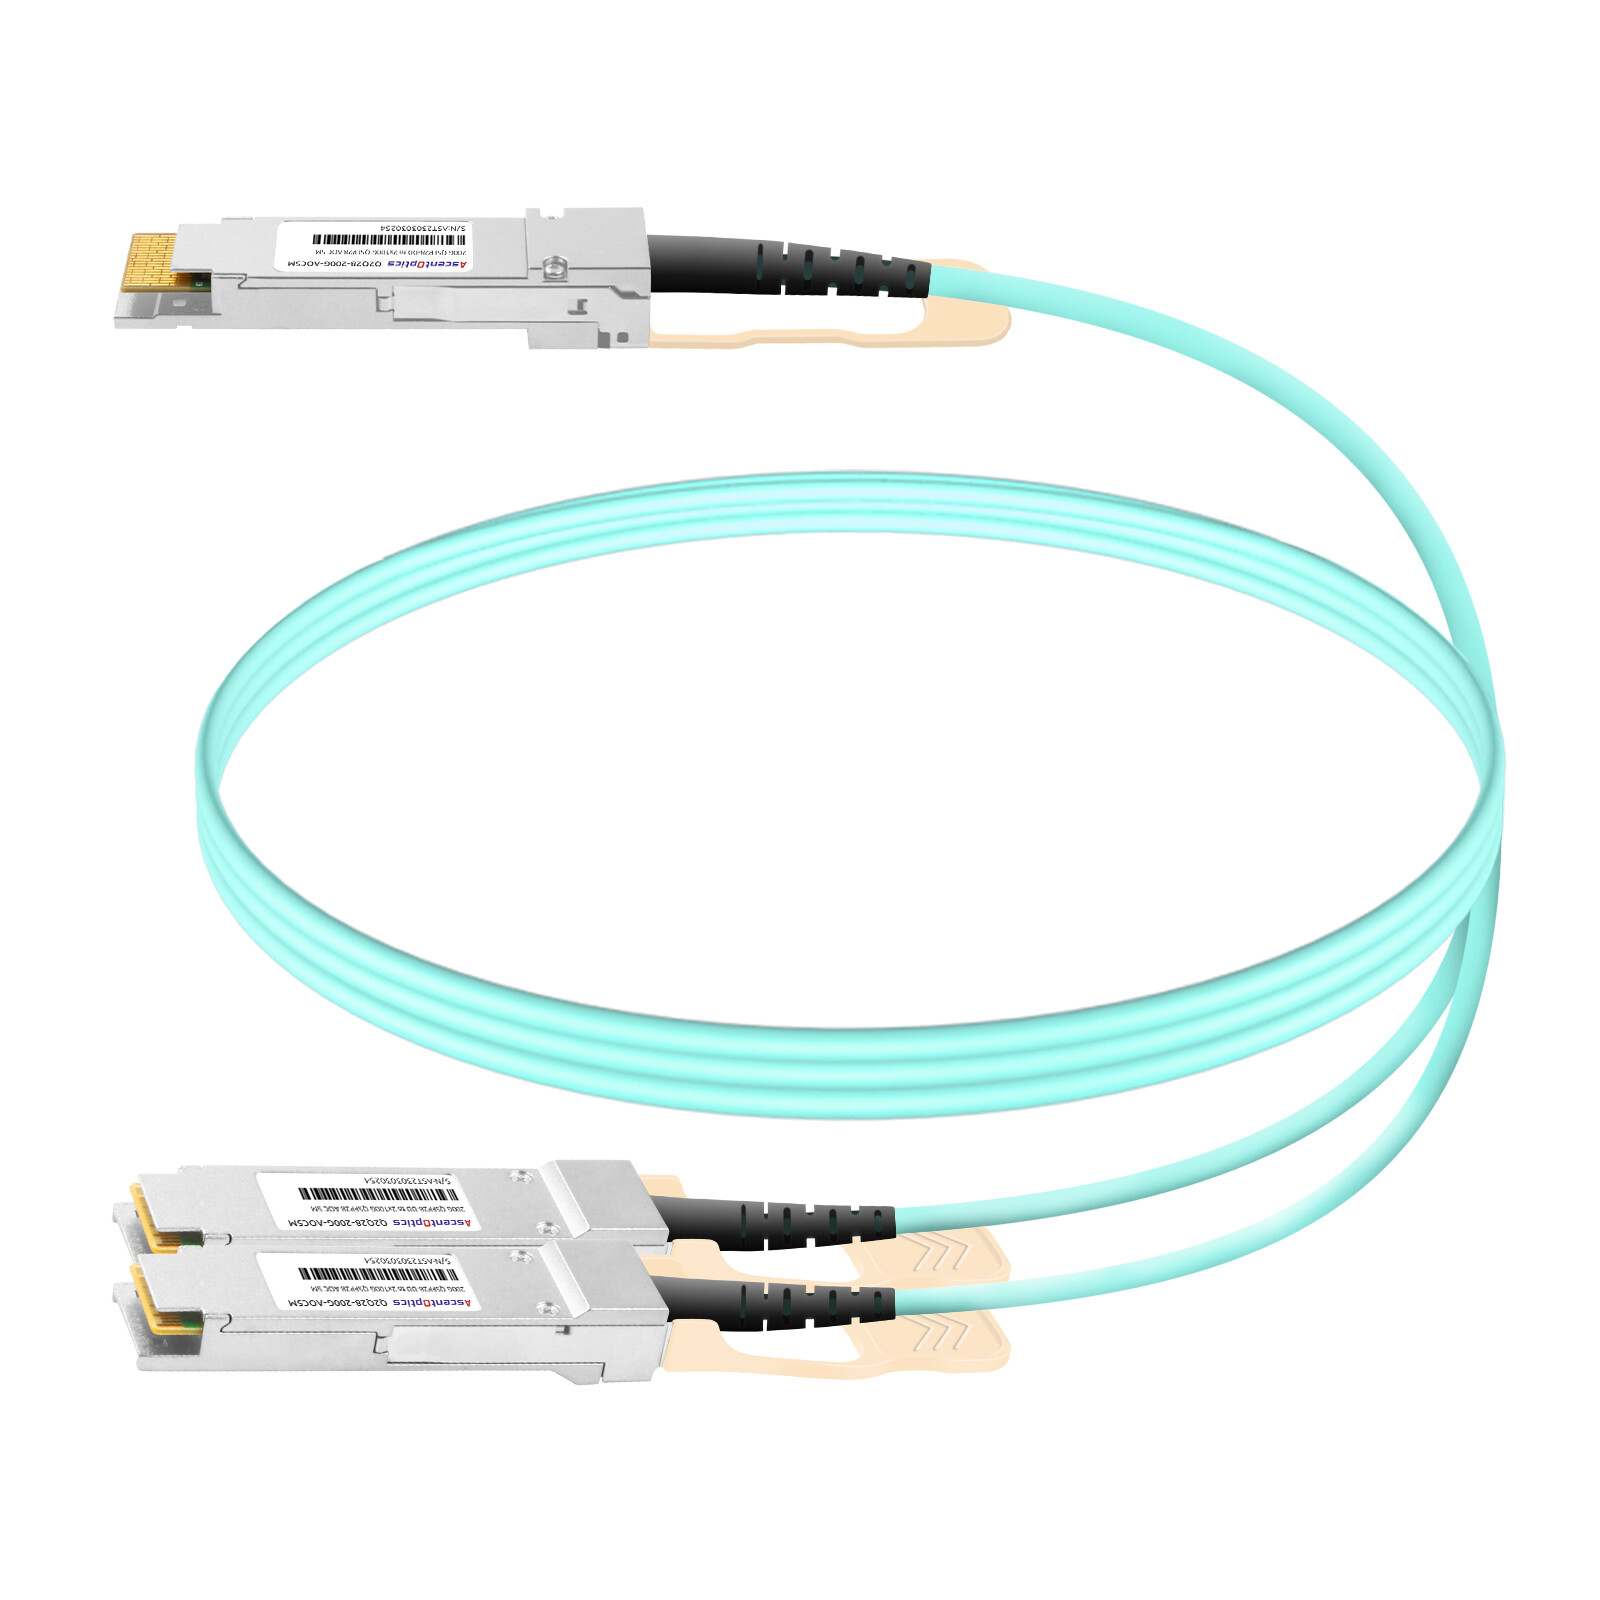 200G QSFP28-DD to 2x 100G QSFP28 Breakout AOC Cable,5 Meters